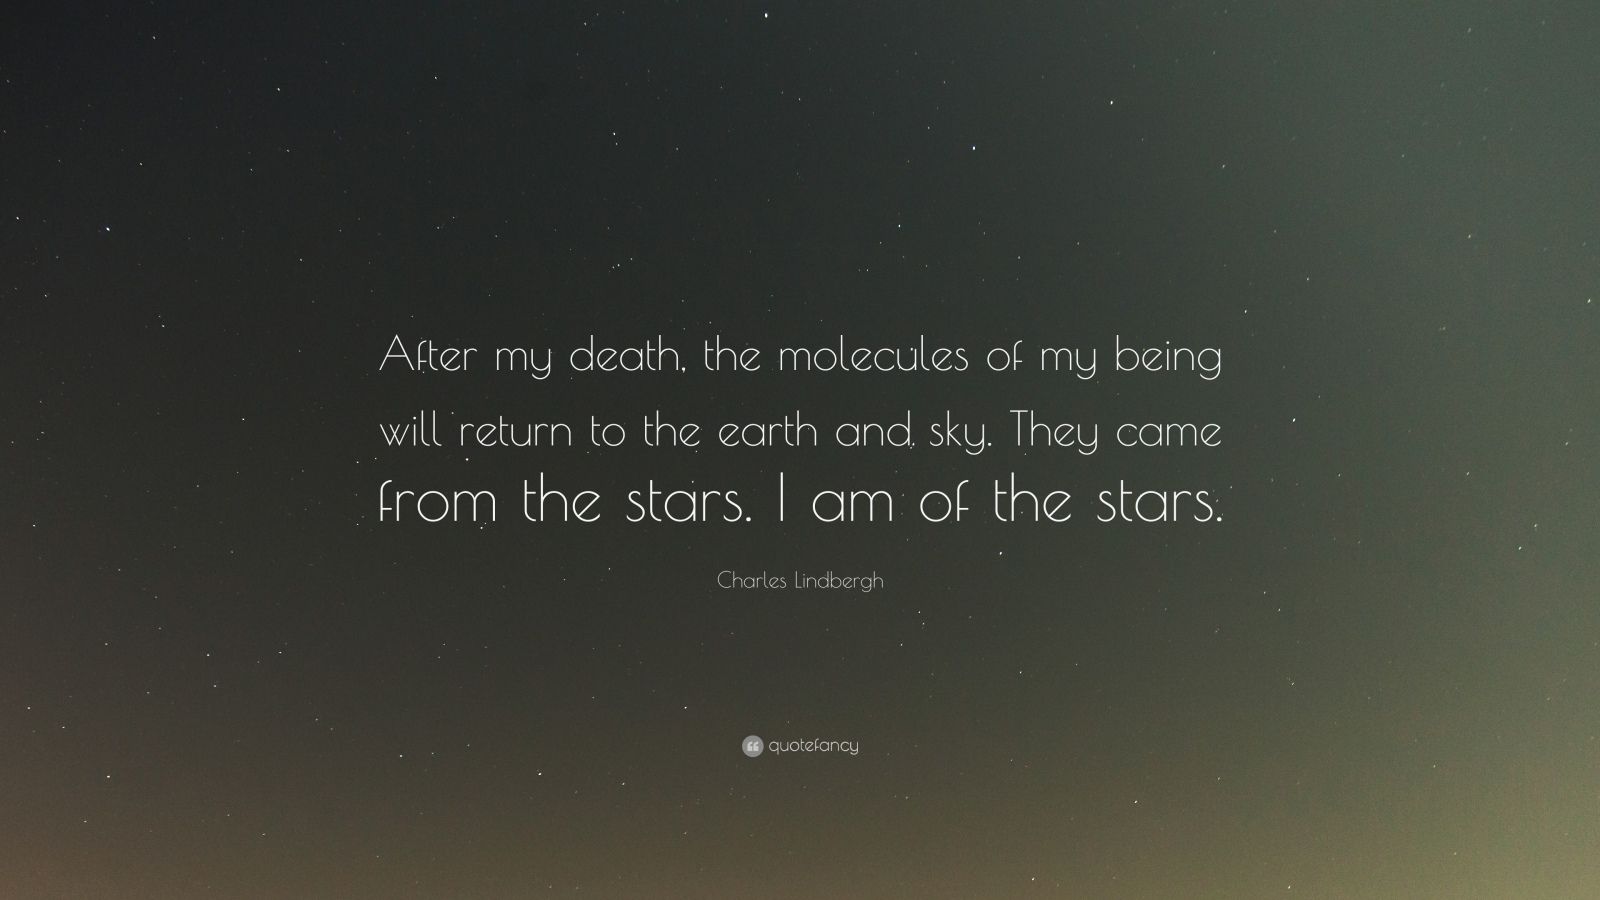 Charles Lindbergh Quote: “After my death, the molecules of my being ...